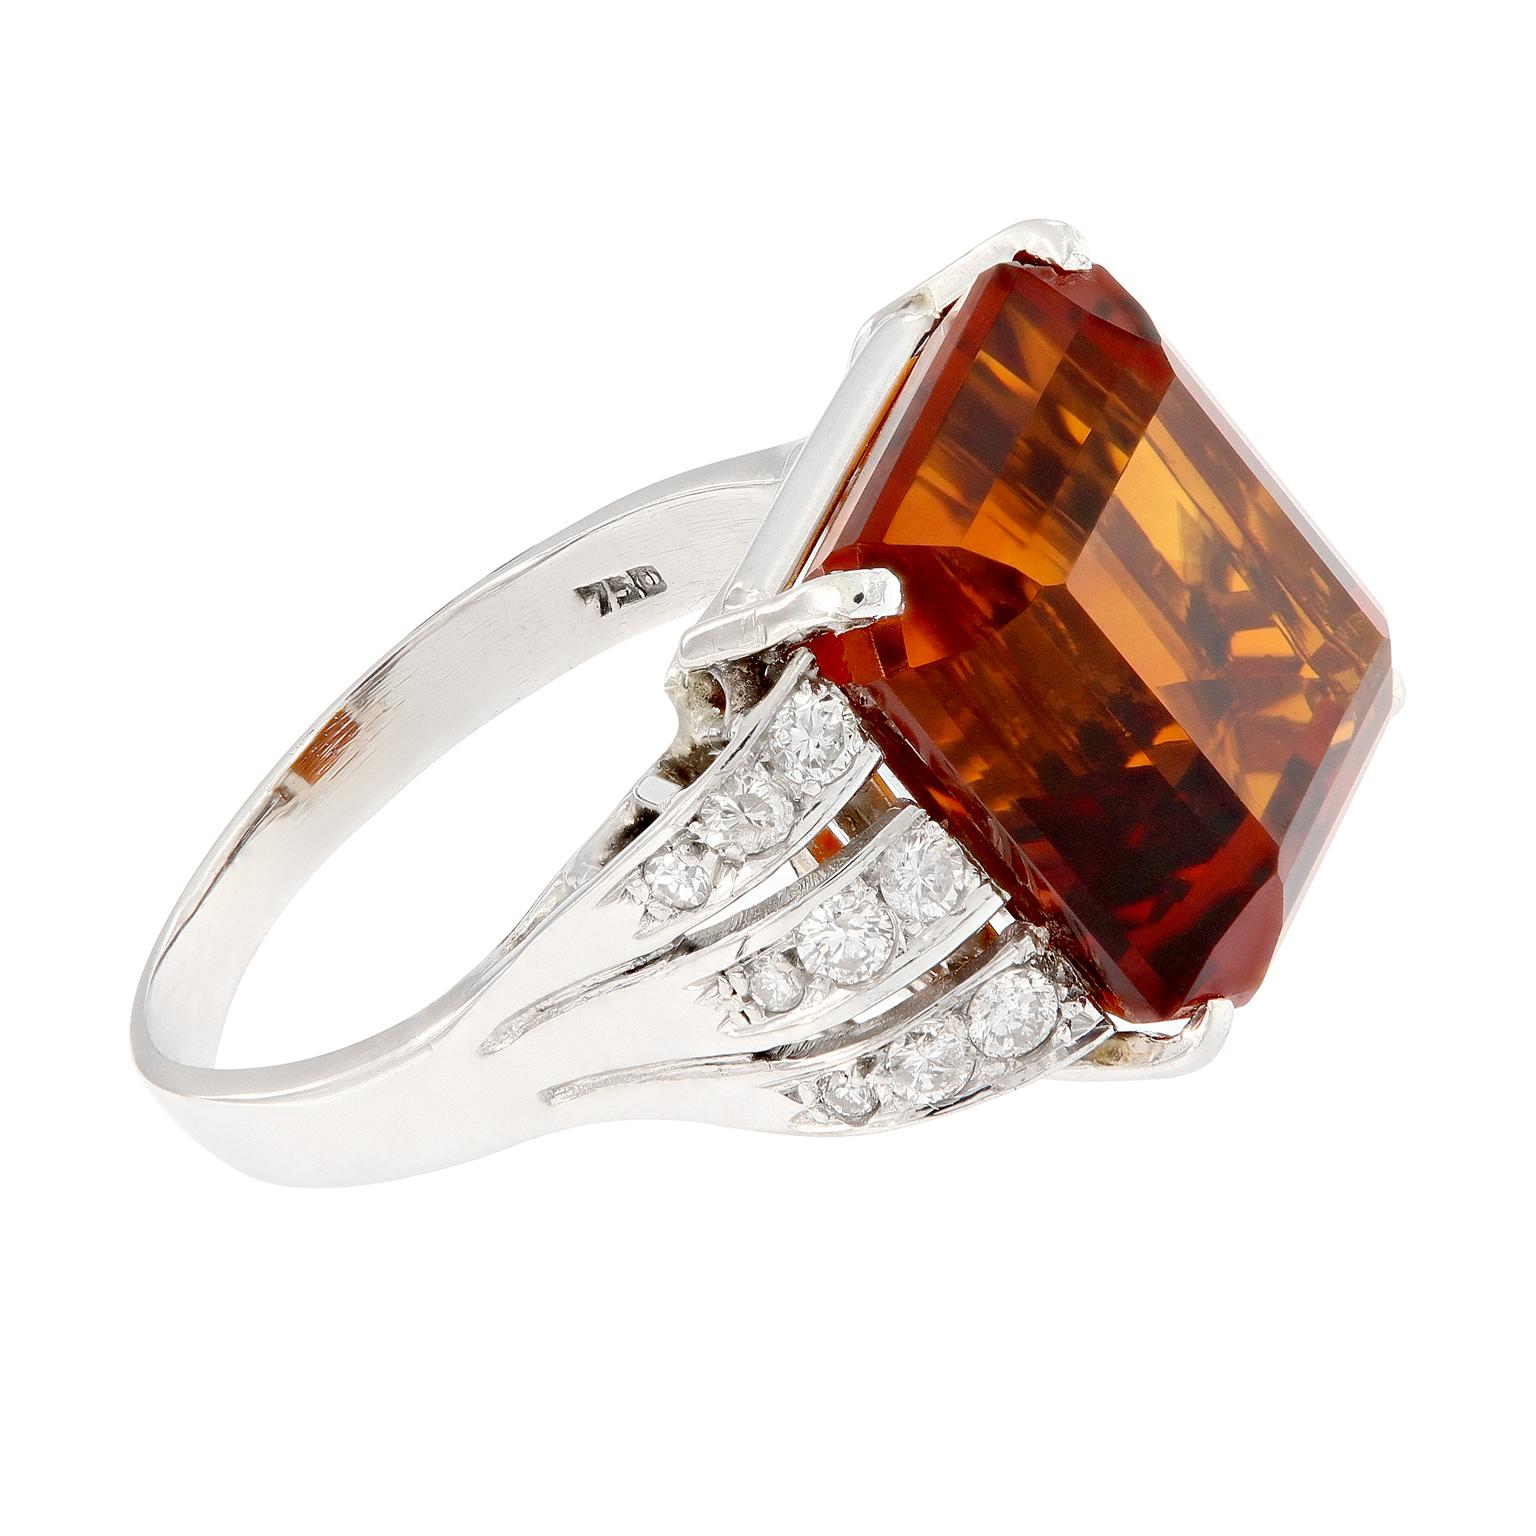 The burnt orange color of this Madeira citrine is a brilliant and bold fashion statement! Ring centers around an over nine carat citrine accented with three rows of white diamonds running down the shank. This estate ring is constructed in 18k white